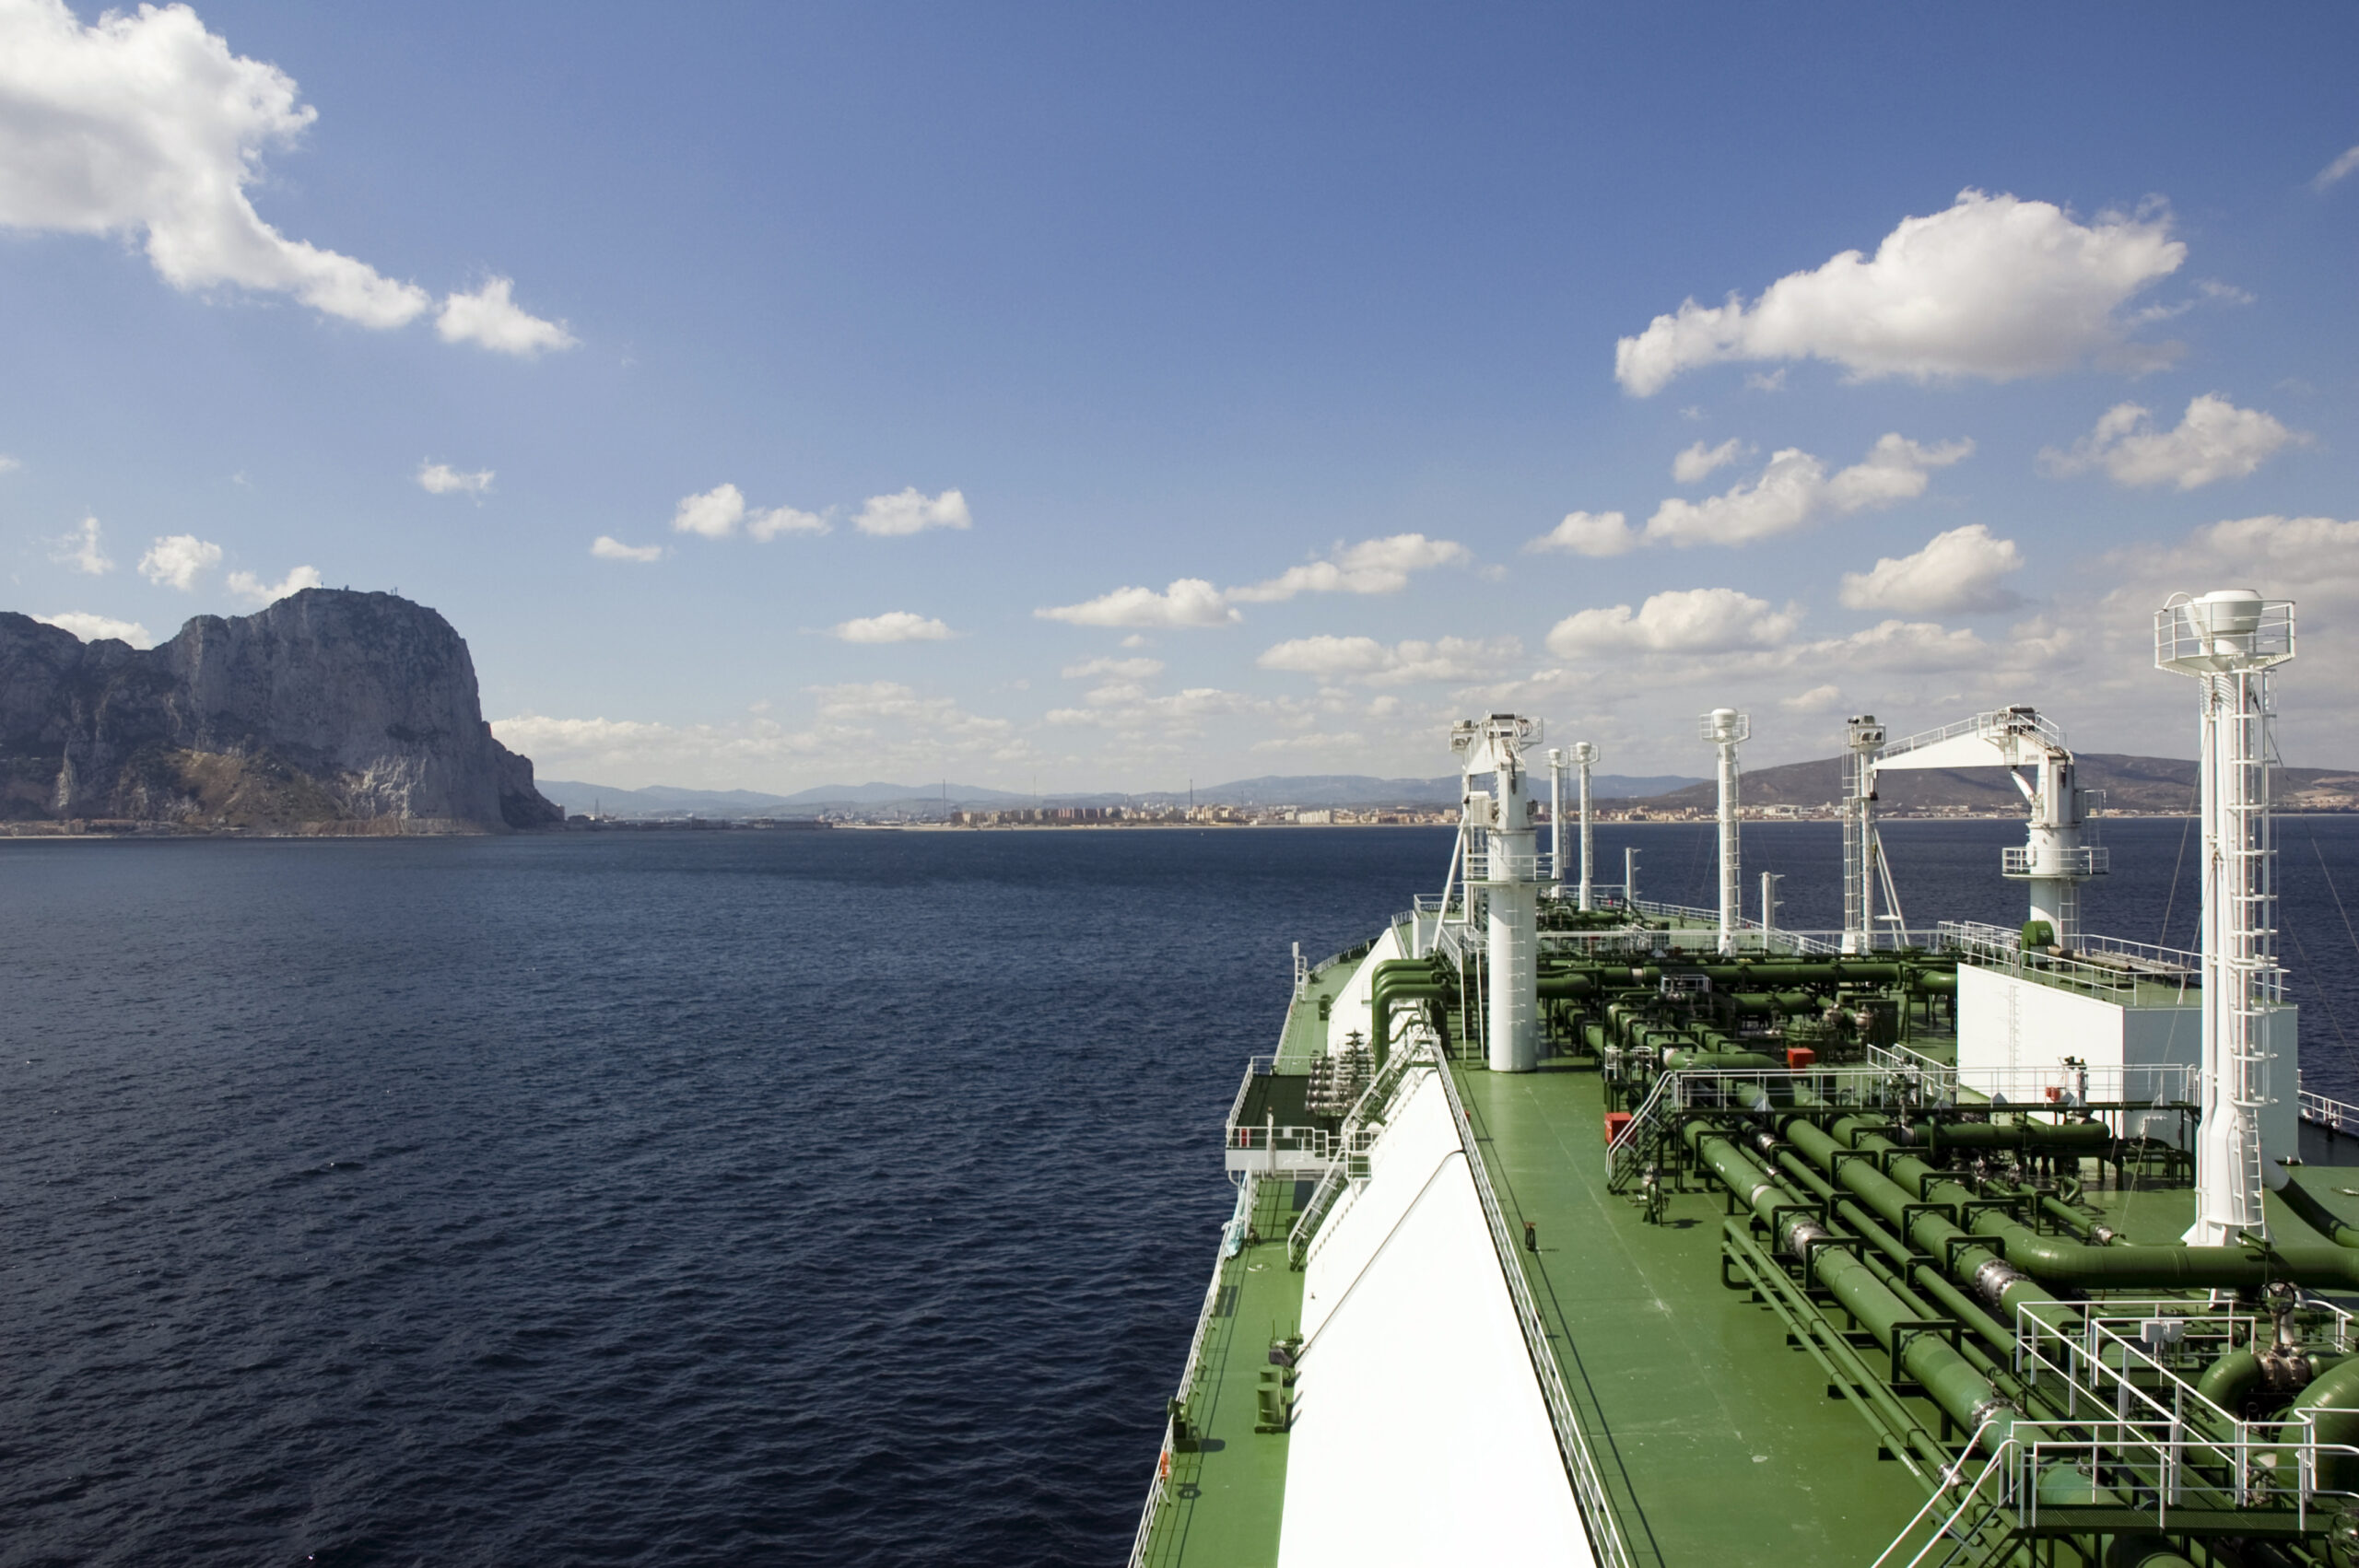 LNG carrier ship designed for transporting natural gas anchored off port.